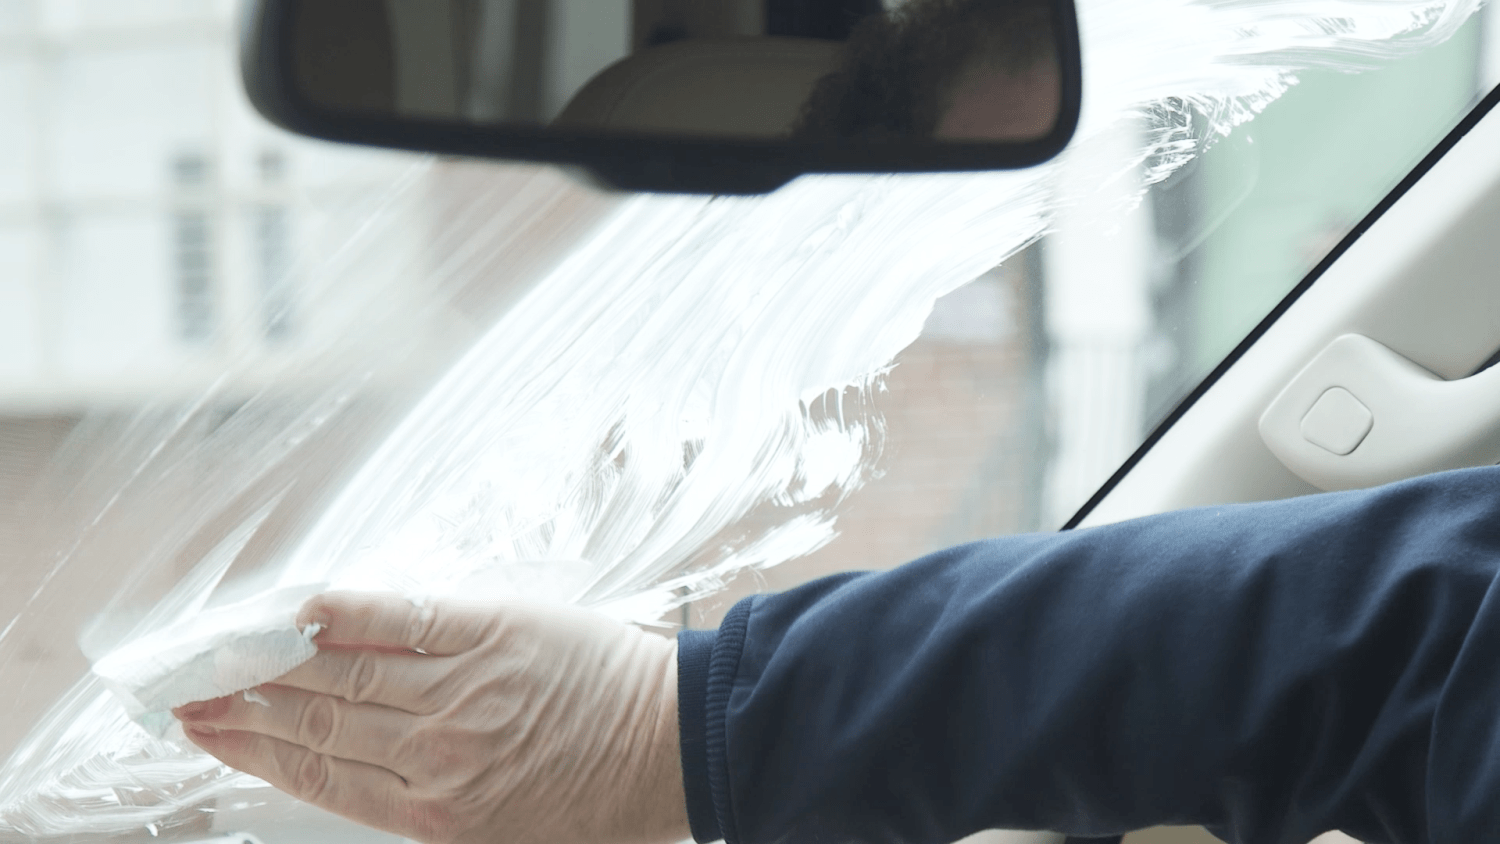 Ways To Keep Windshield From Freezing